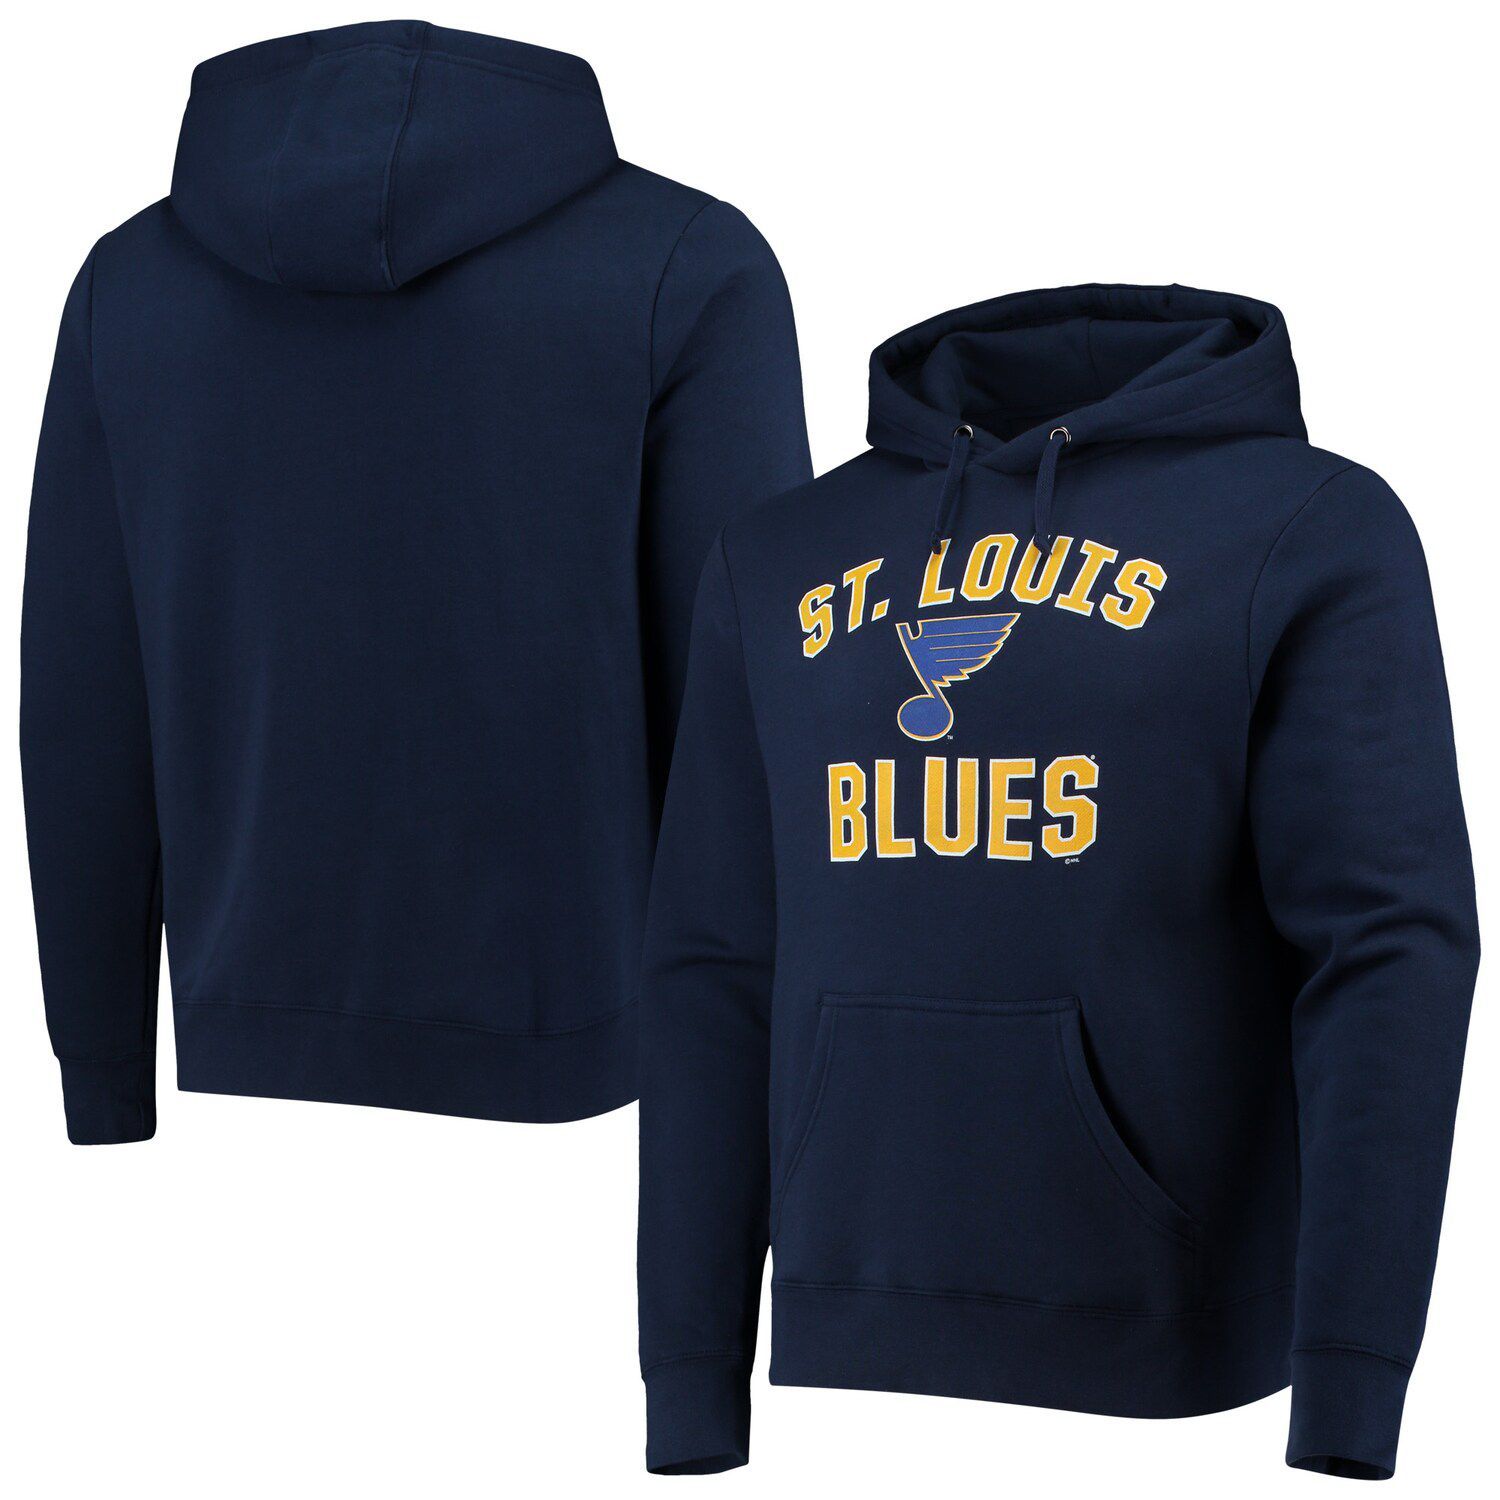 Women's Fanatics Branded Blue/Gold St. Louis Blues Colors of Pride Colorblock Pullover Hoodie